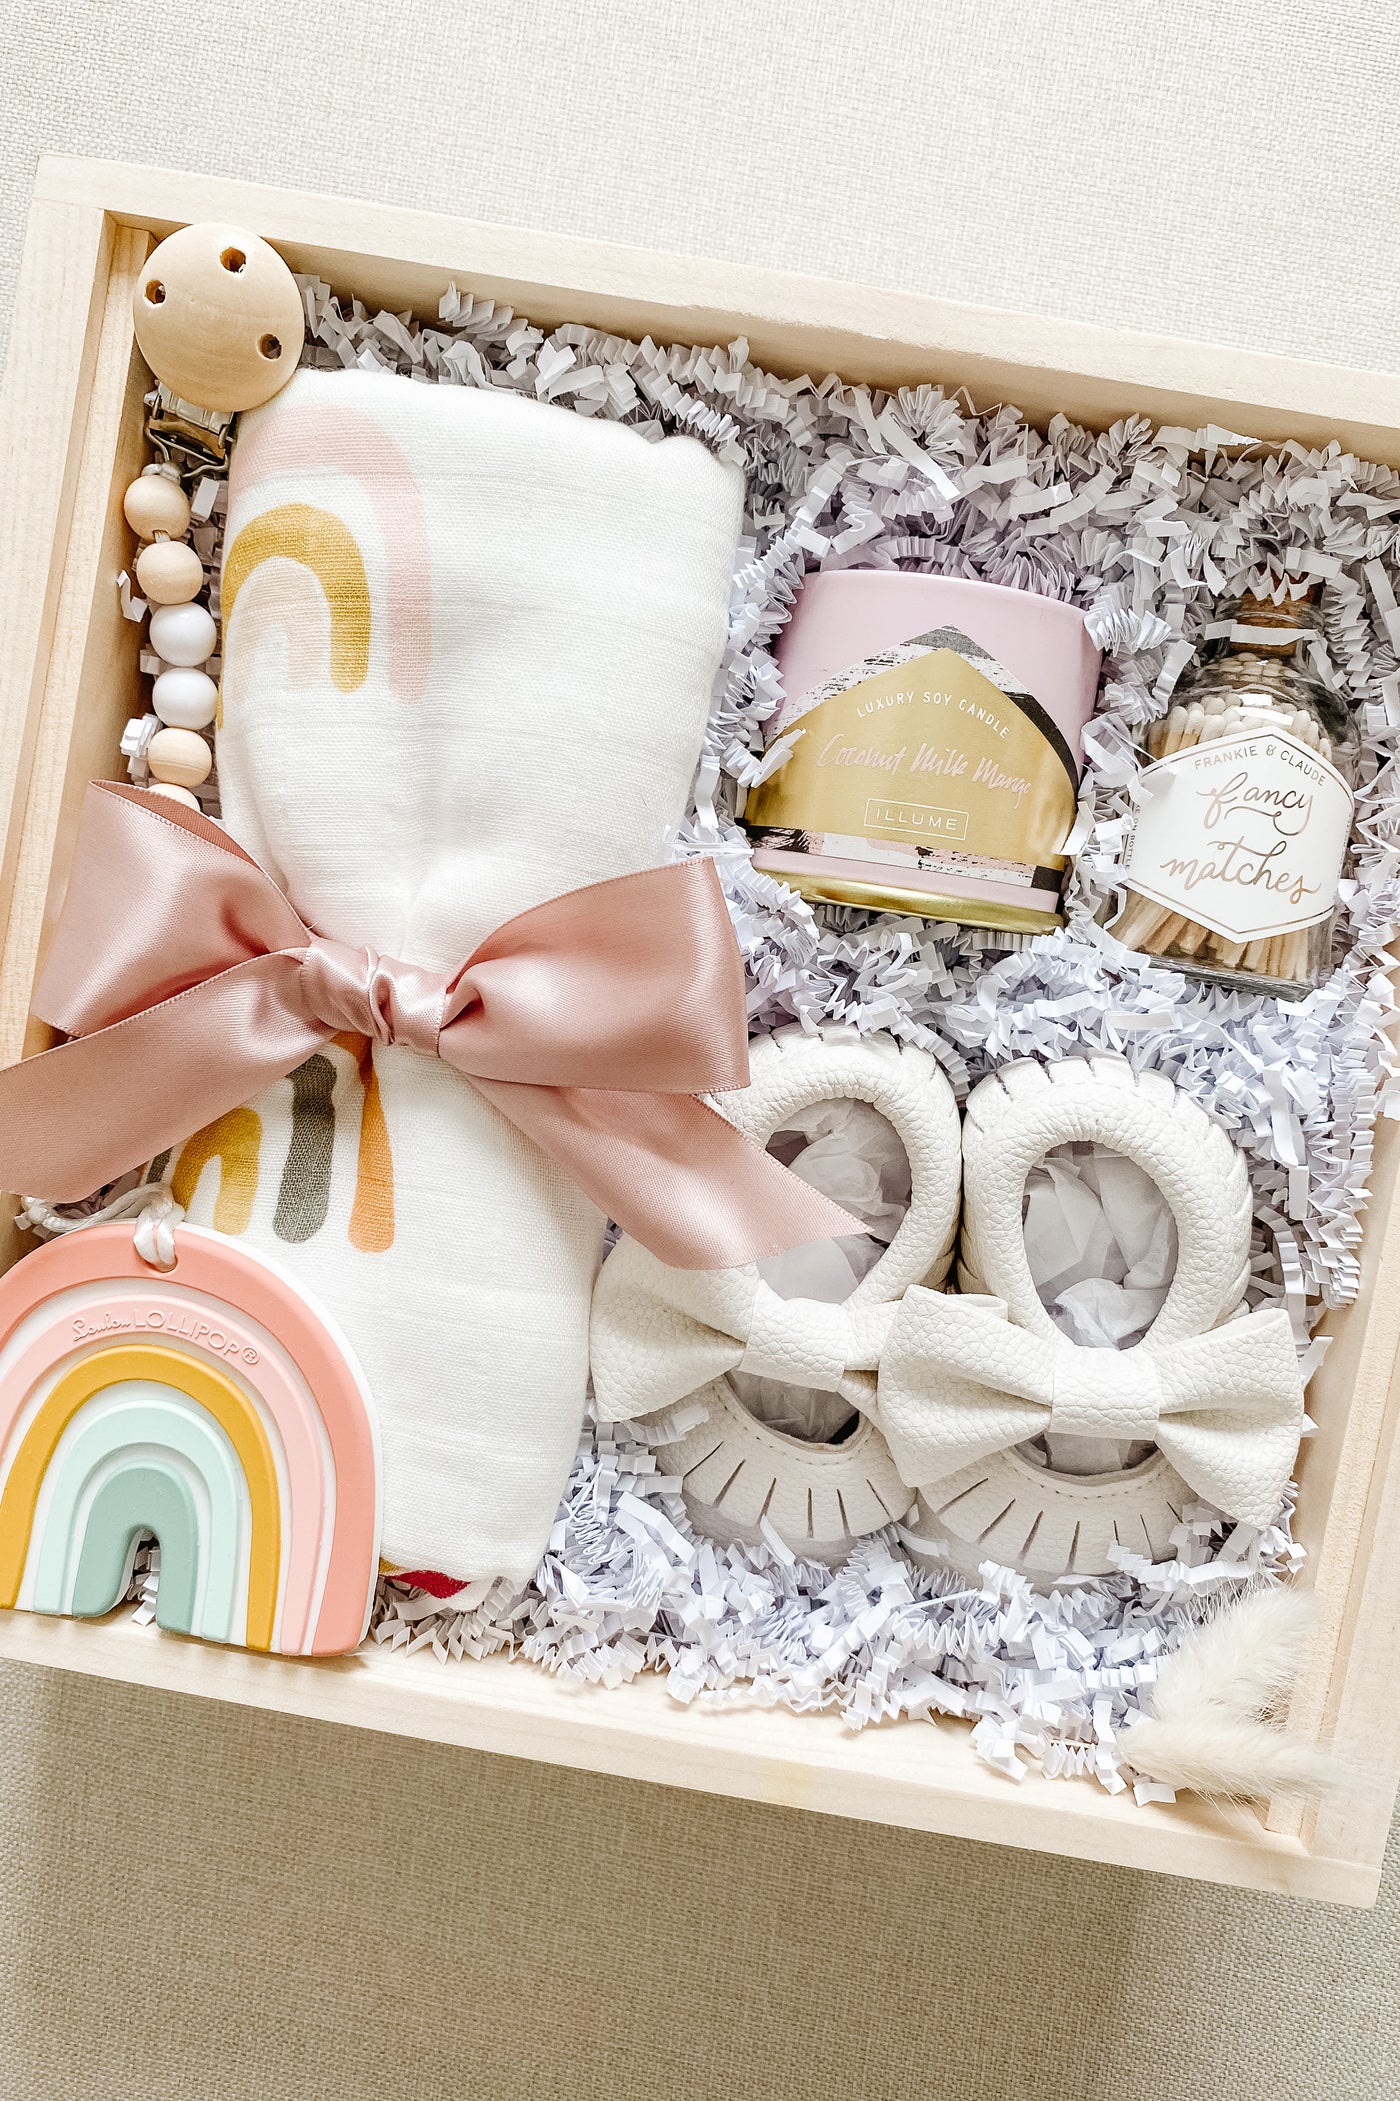 Shop baby gifts, including baby gift baskets, keepsake baby boxes, and personalized baby gift gifts Toronto Canada